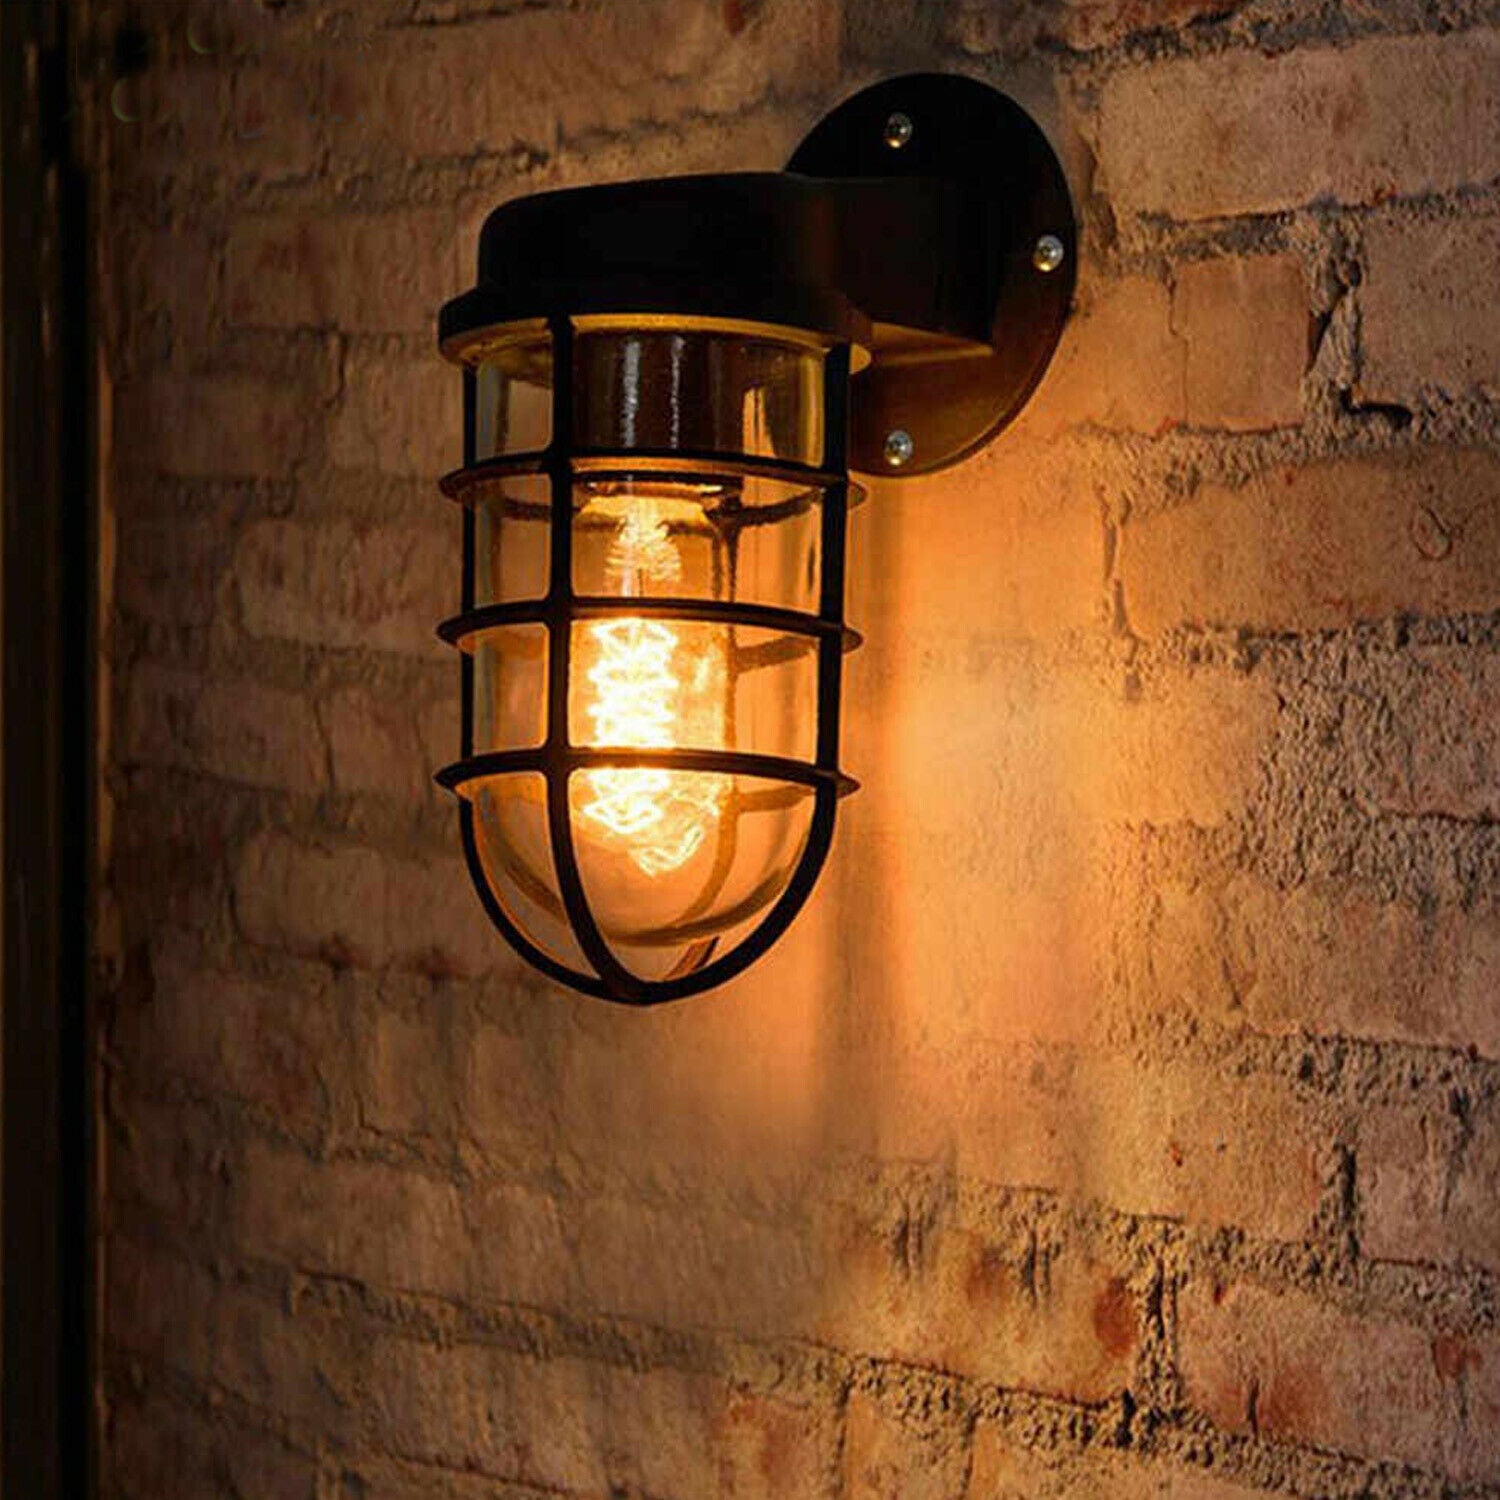 Set of Vintage Industrial Iron Wall Sconces - Cage Design for Home Decor-Application image